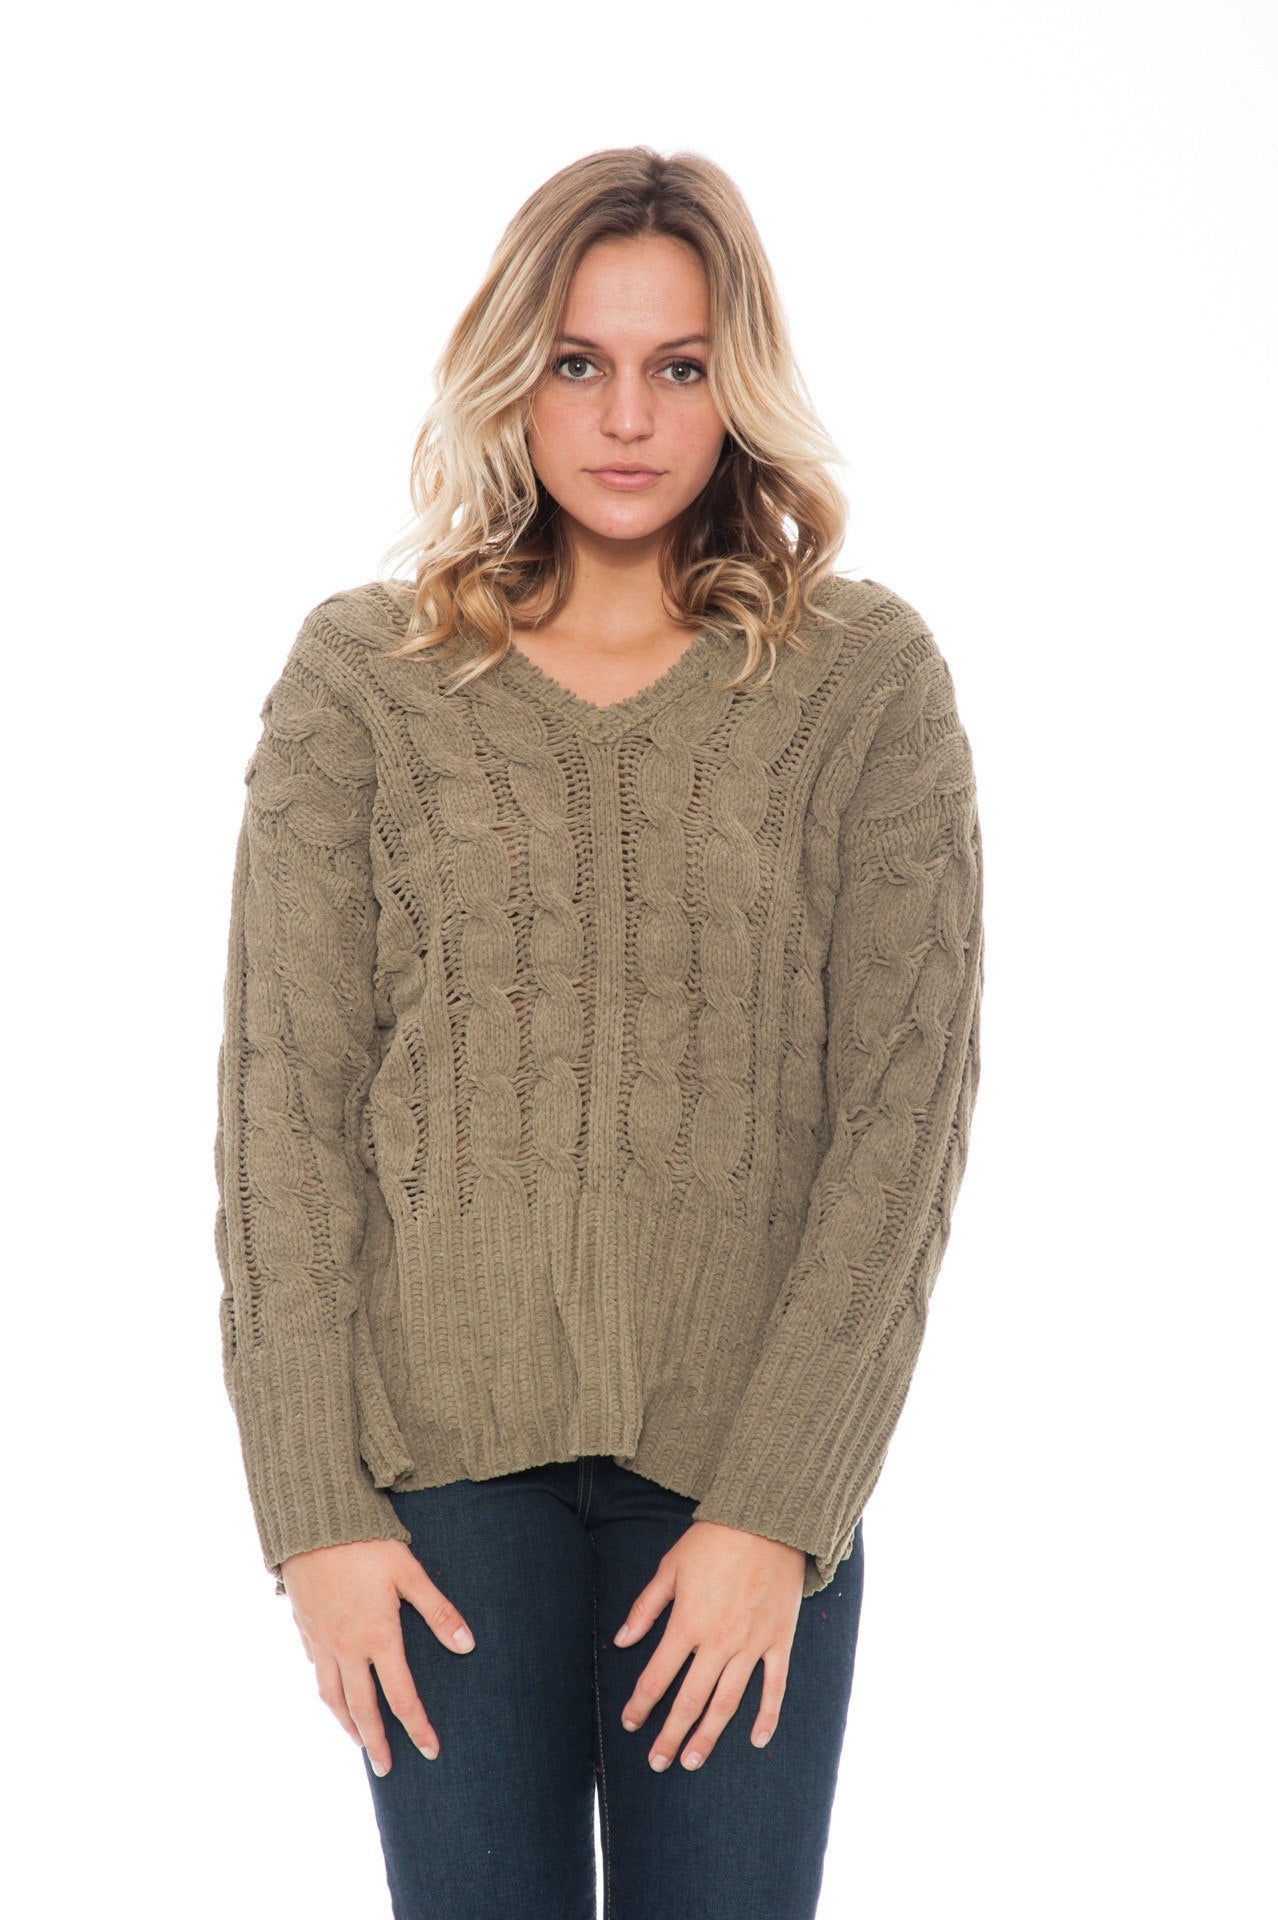 Sweater - Side Slit Cable Knit Top by Paper Crane